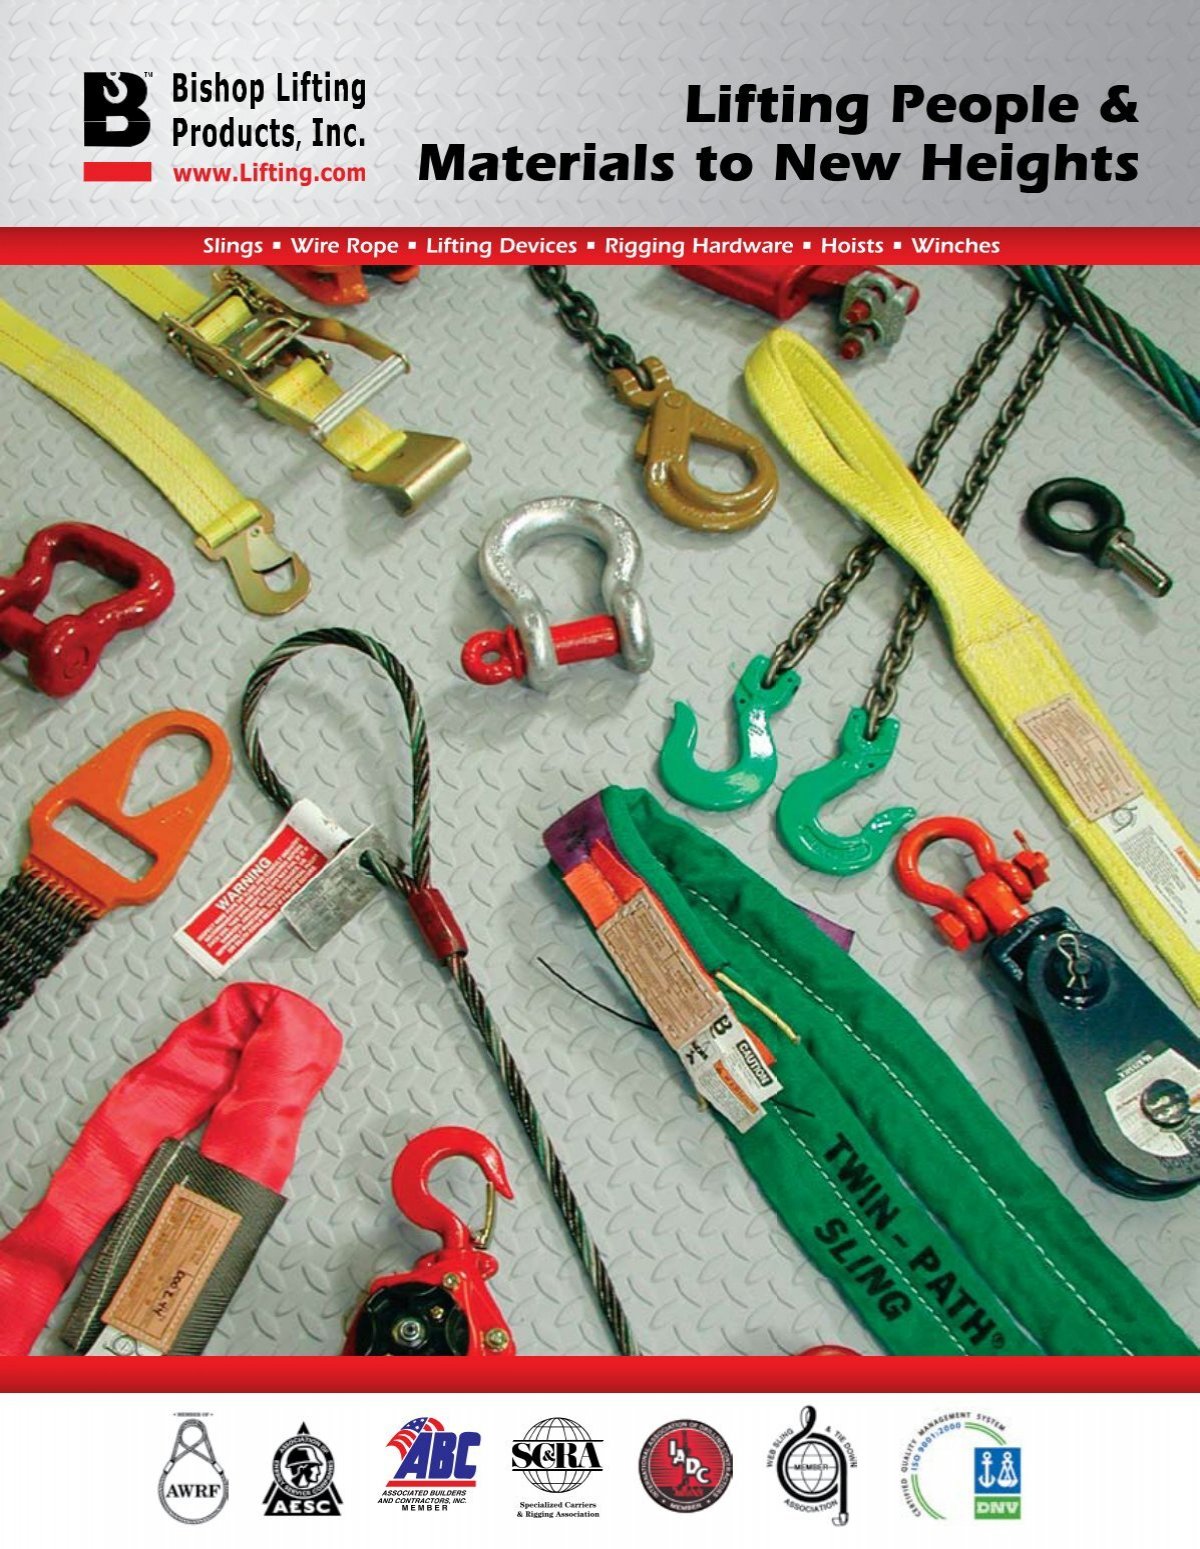 Slings â€¢ Wire Rope â€¢ Lifting Devices â€¢ Rigging Hardware â